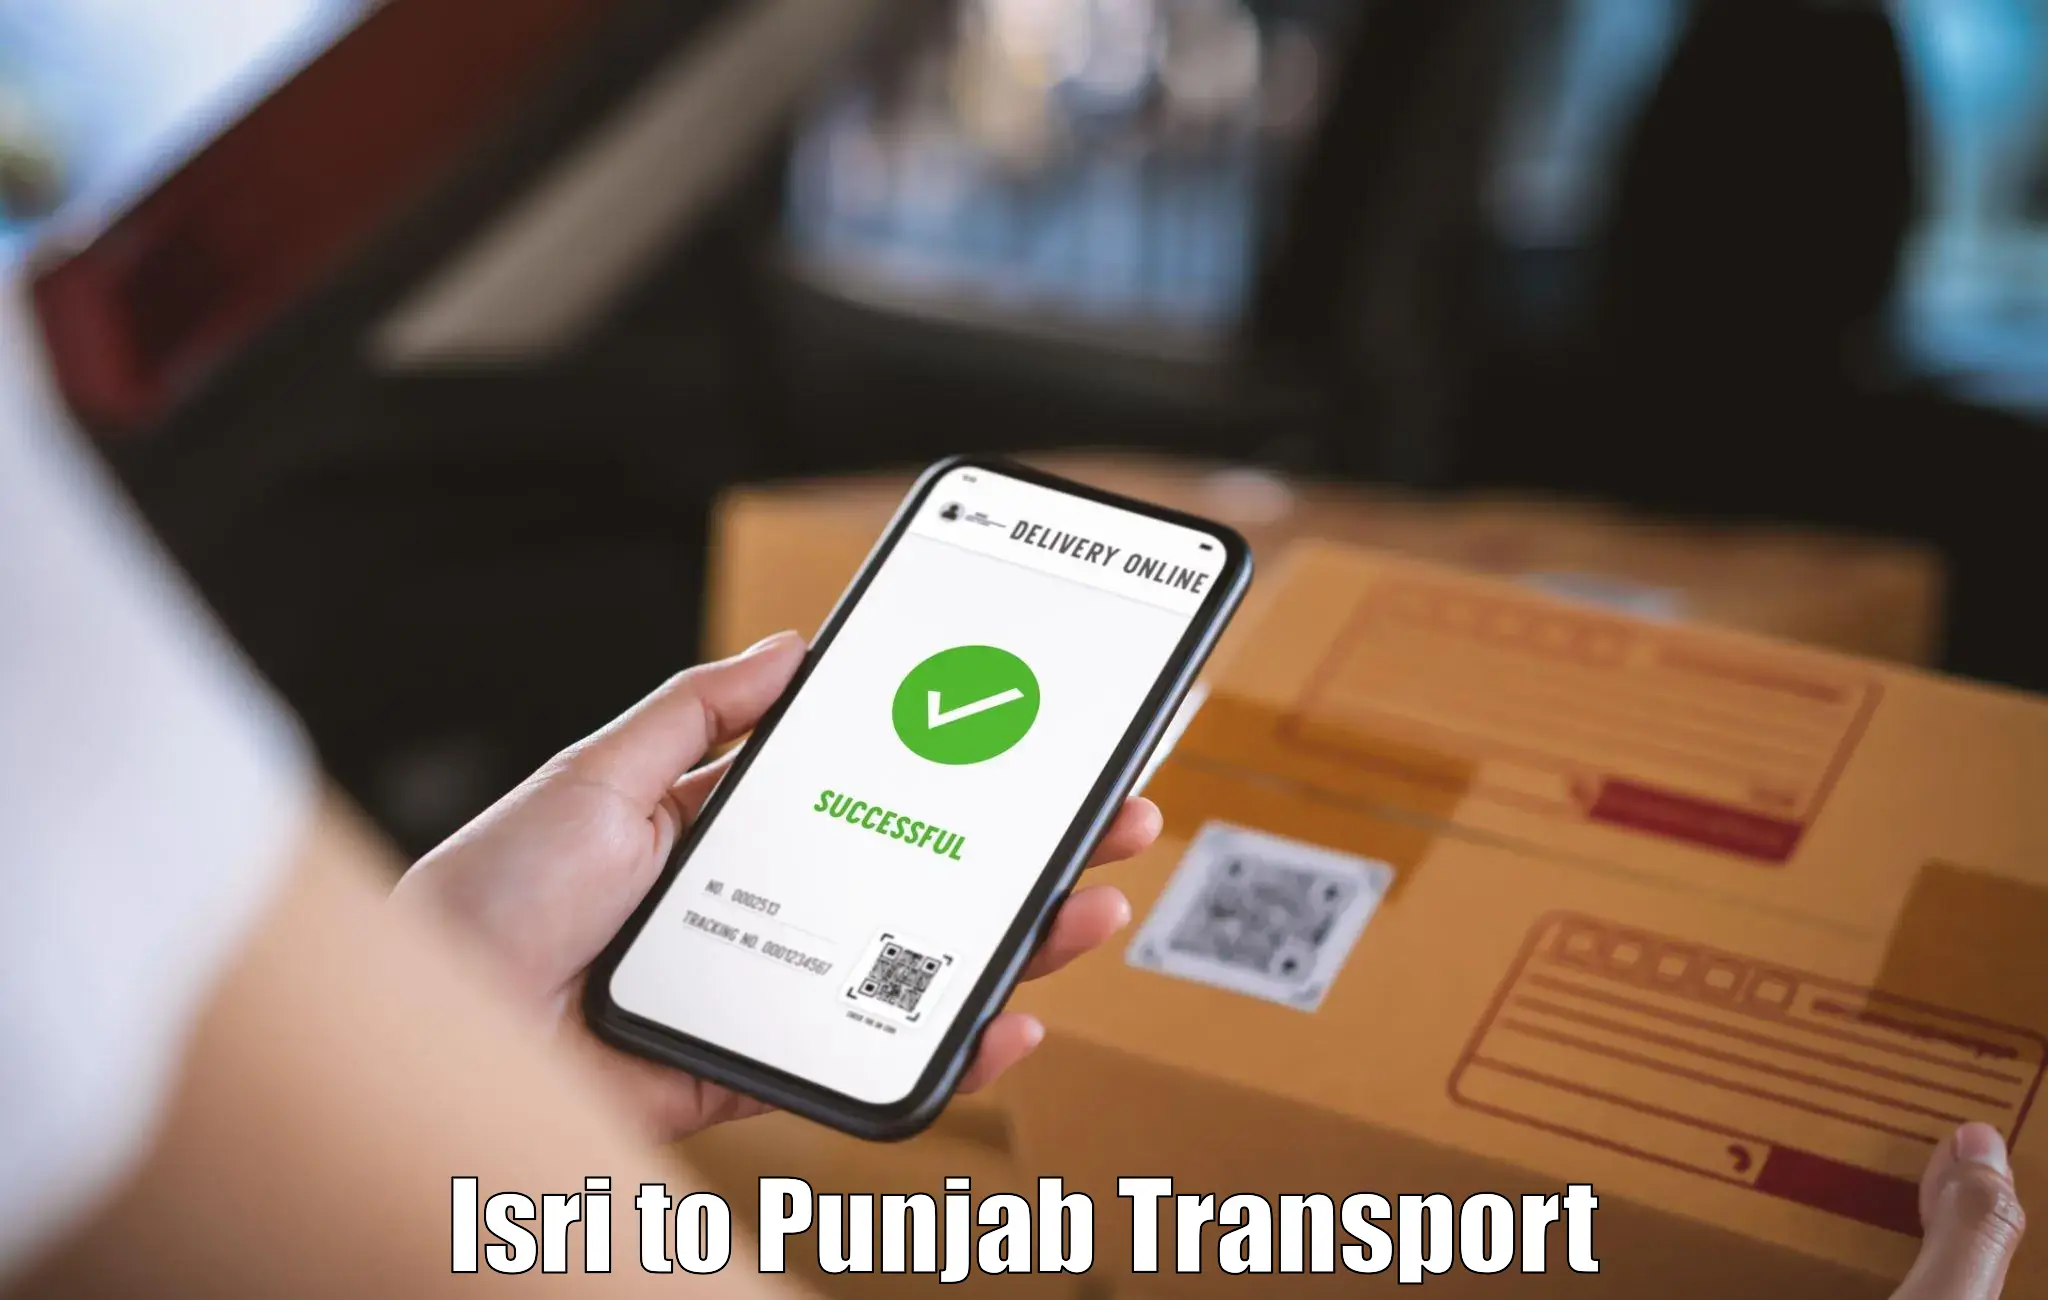 Nationwide transport services Isri to Mohali